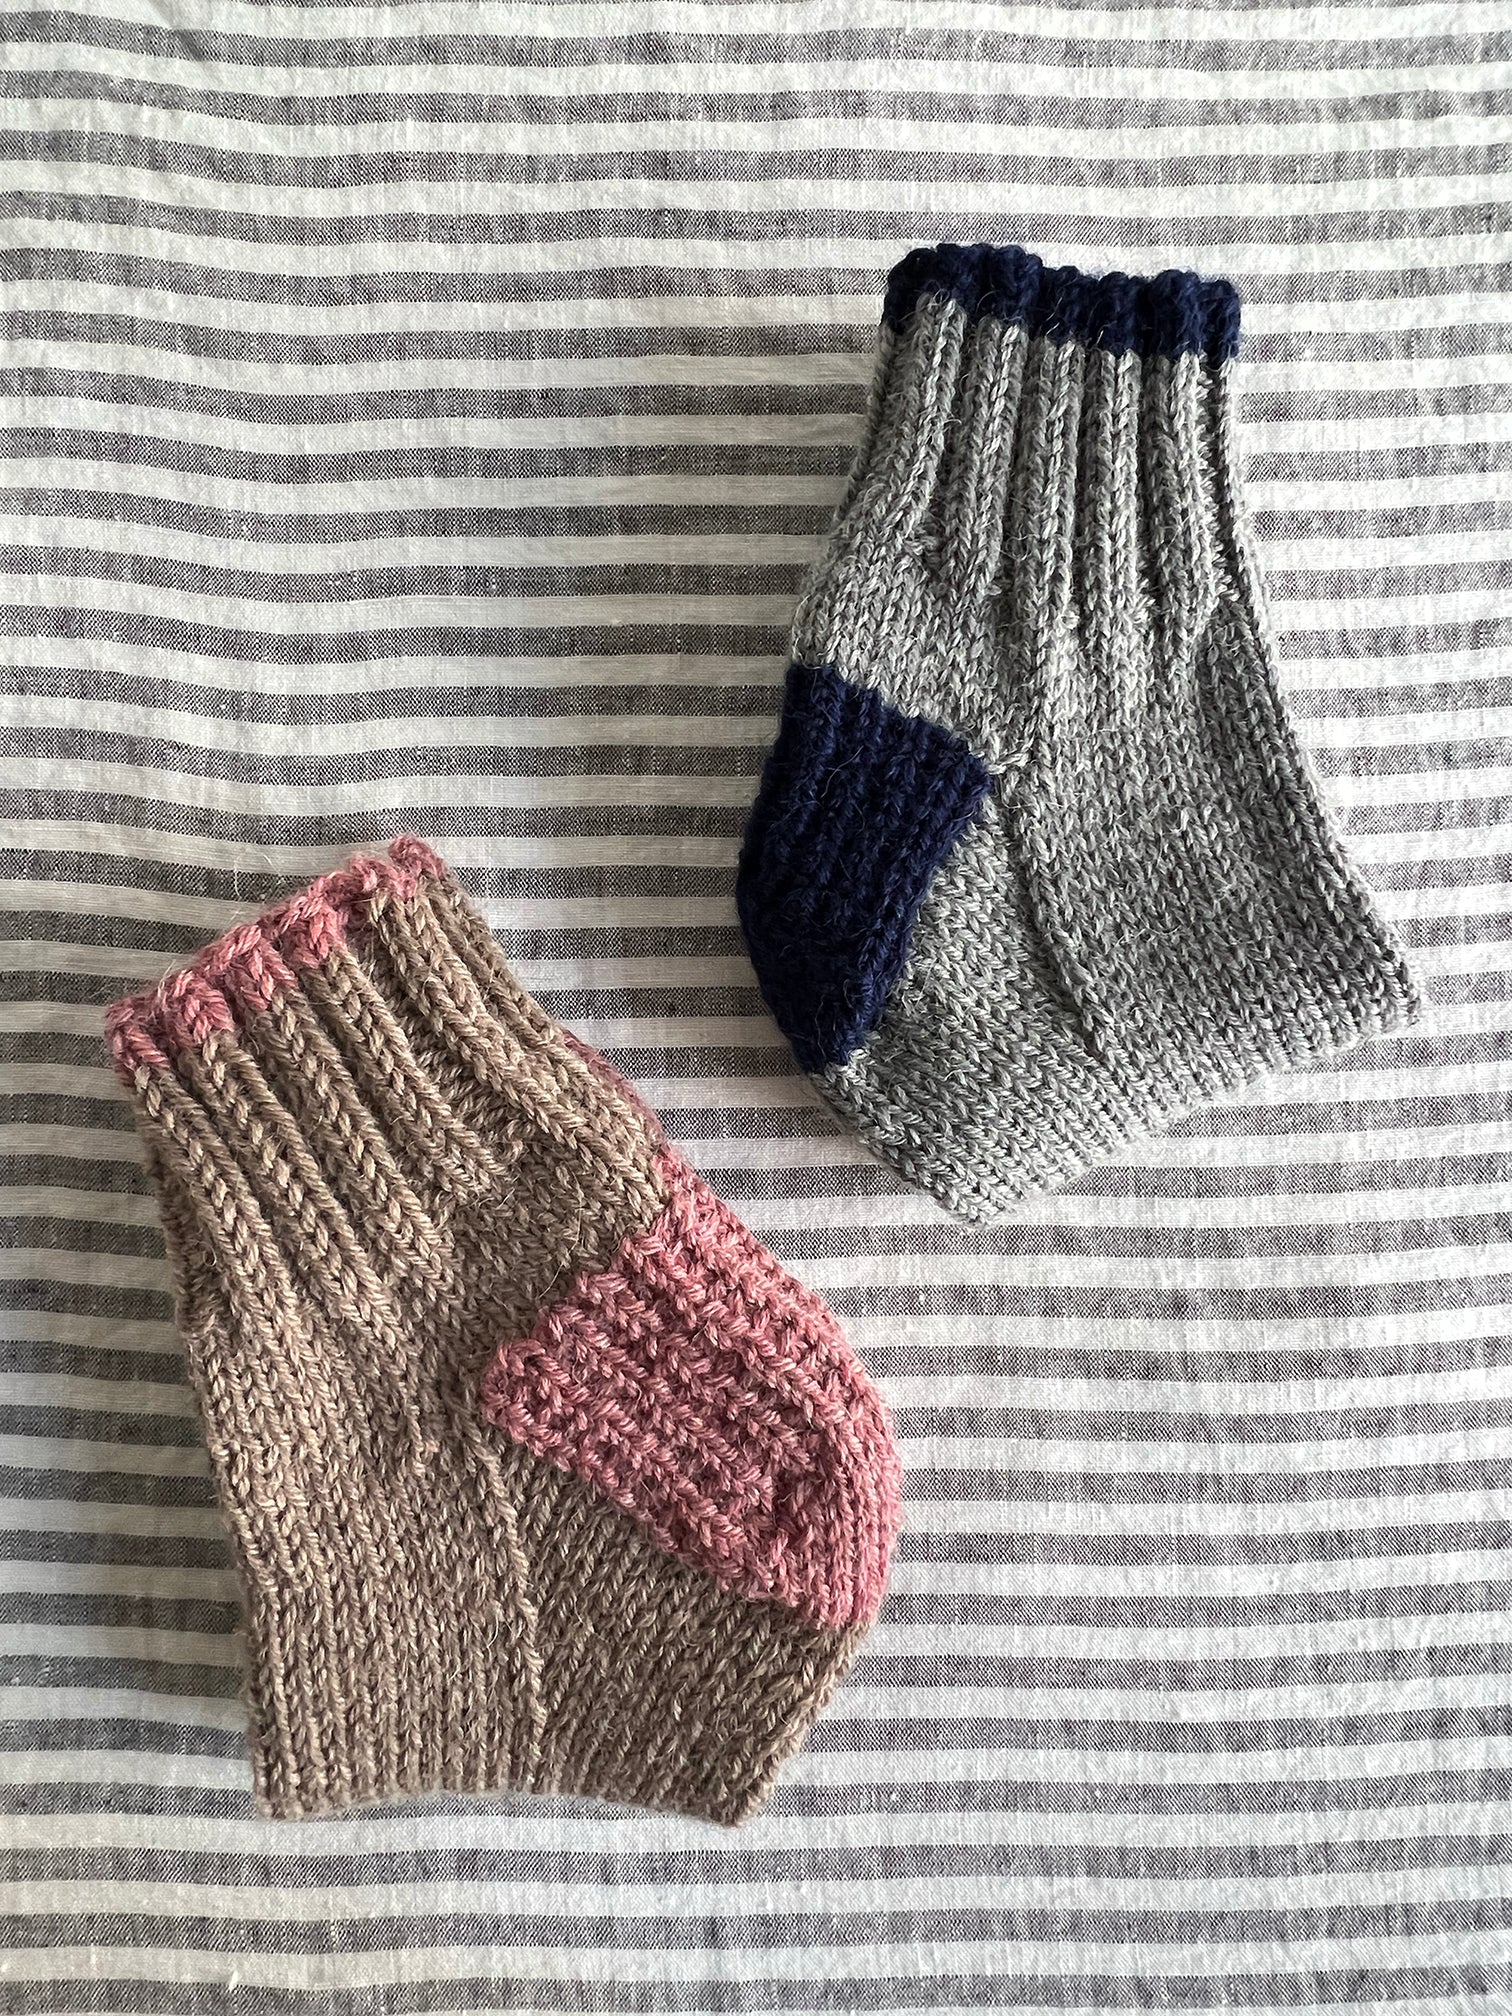 Hand Knitted Socks – likewise